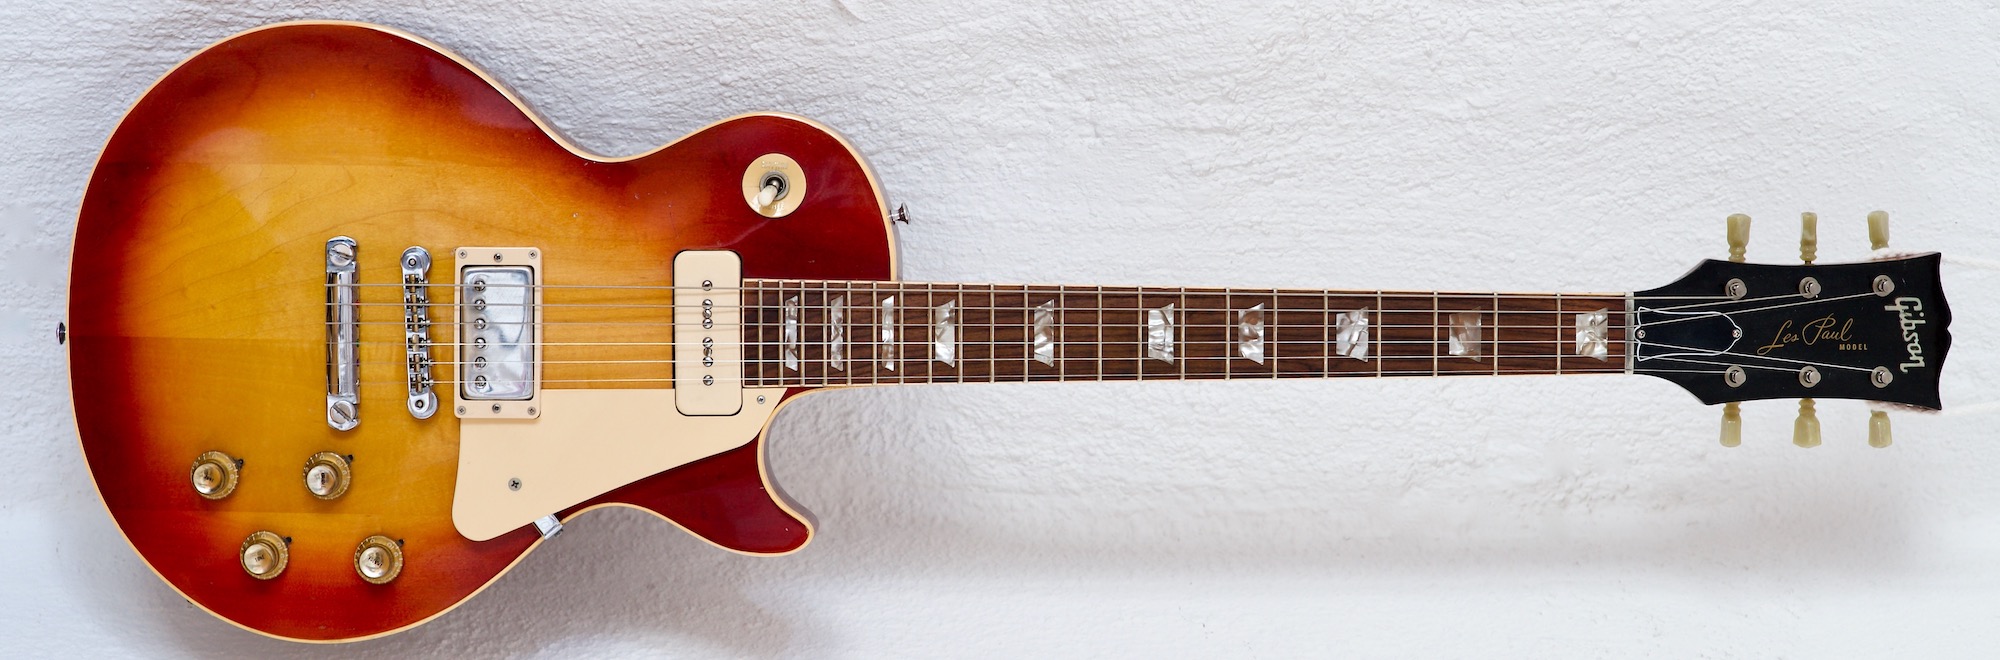 A Gibson Les Paul Deluxe from 1973